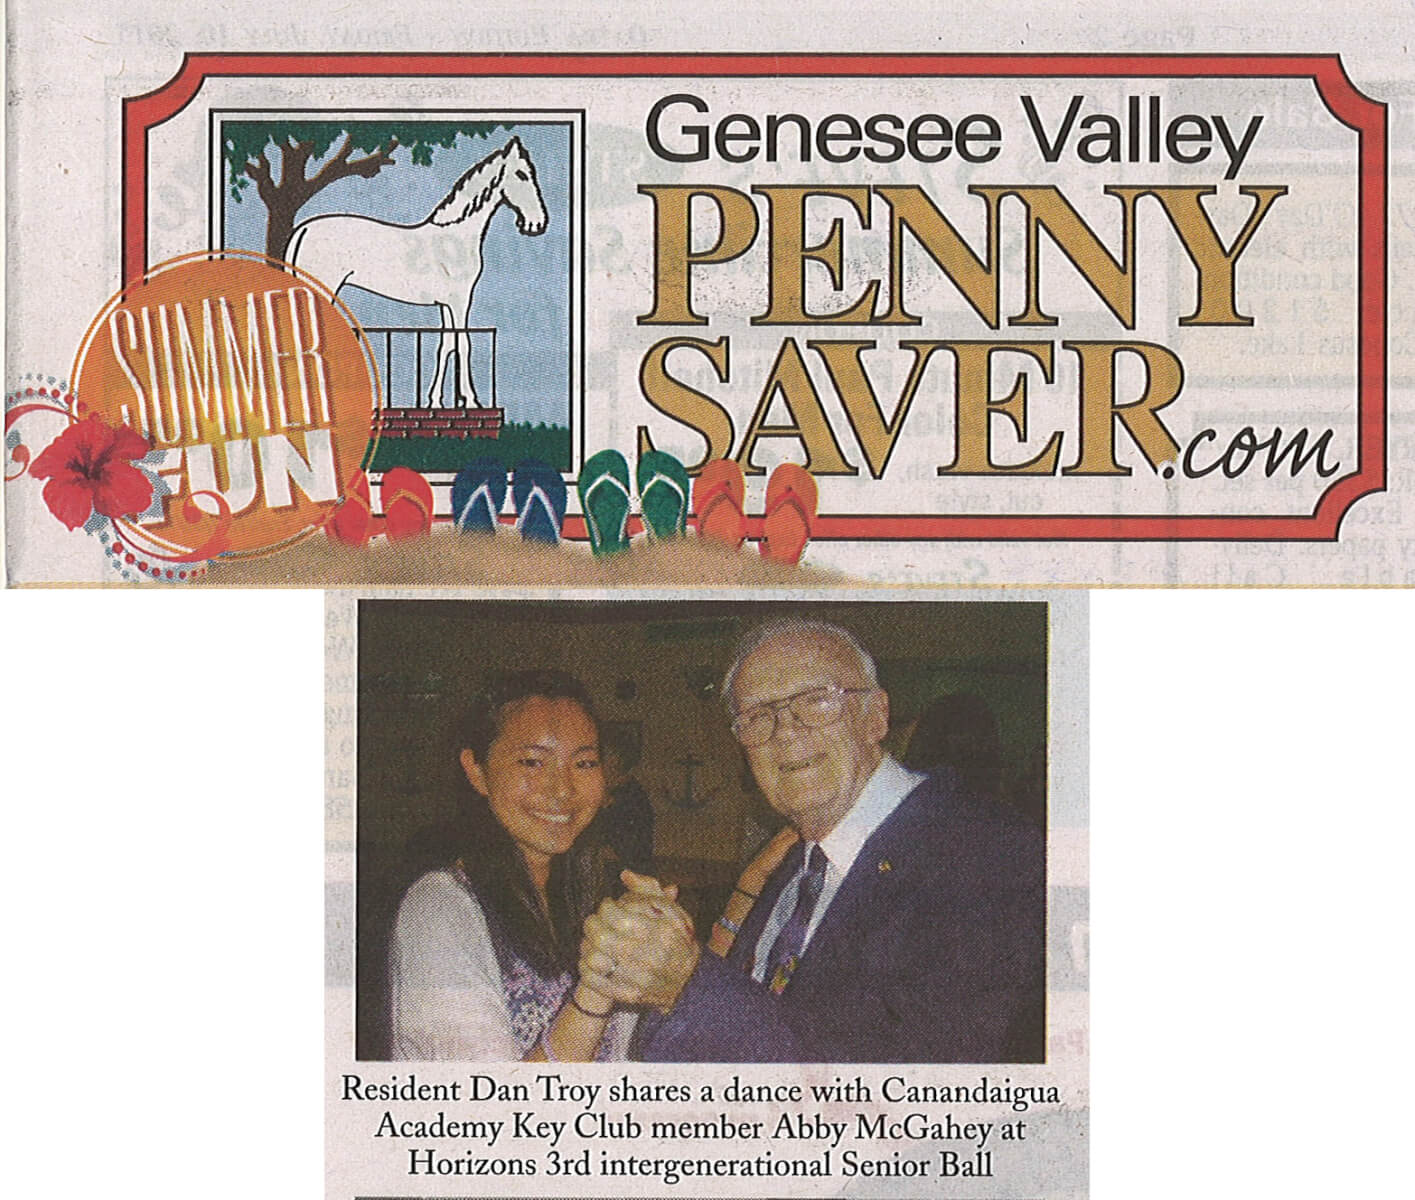 Horizons Senior Ball photo in the Genesee Valley Penny Saver July 10, 2015